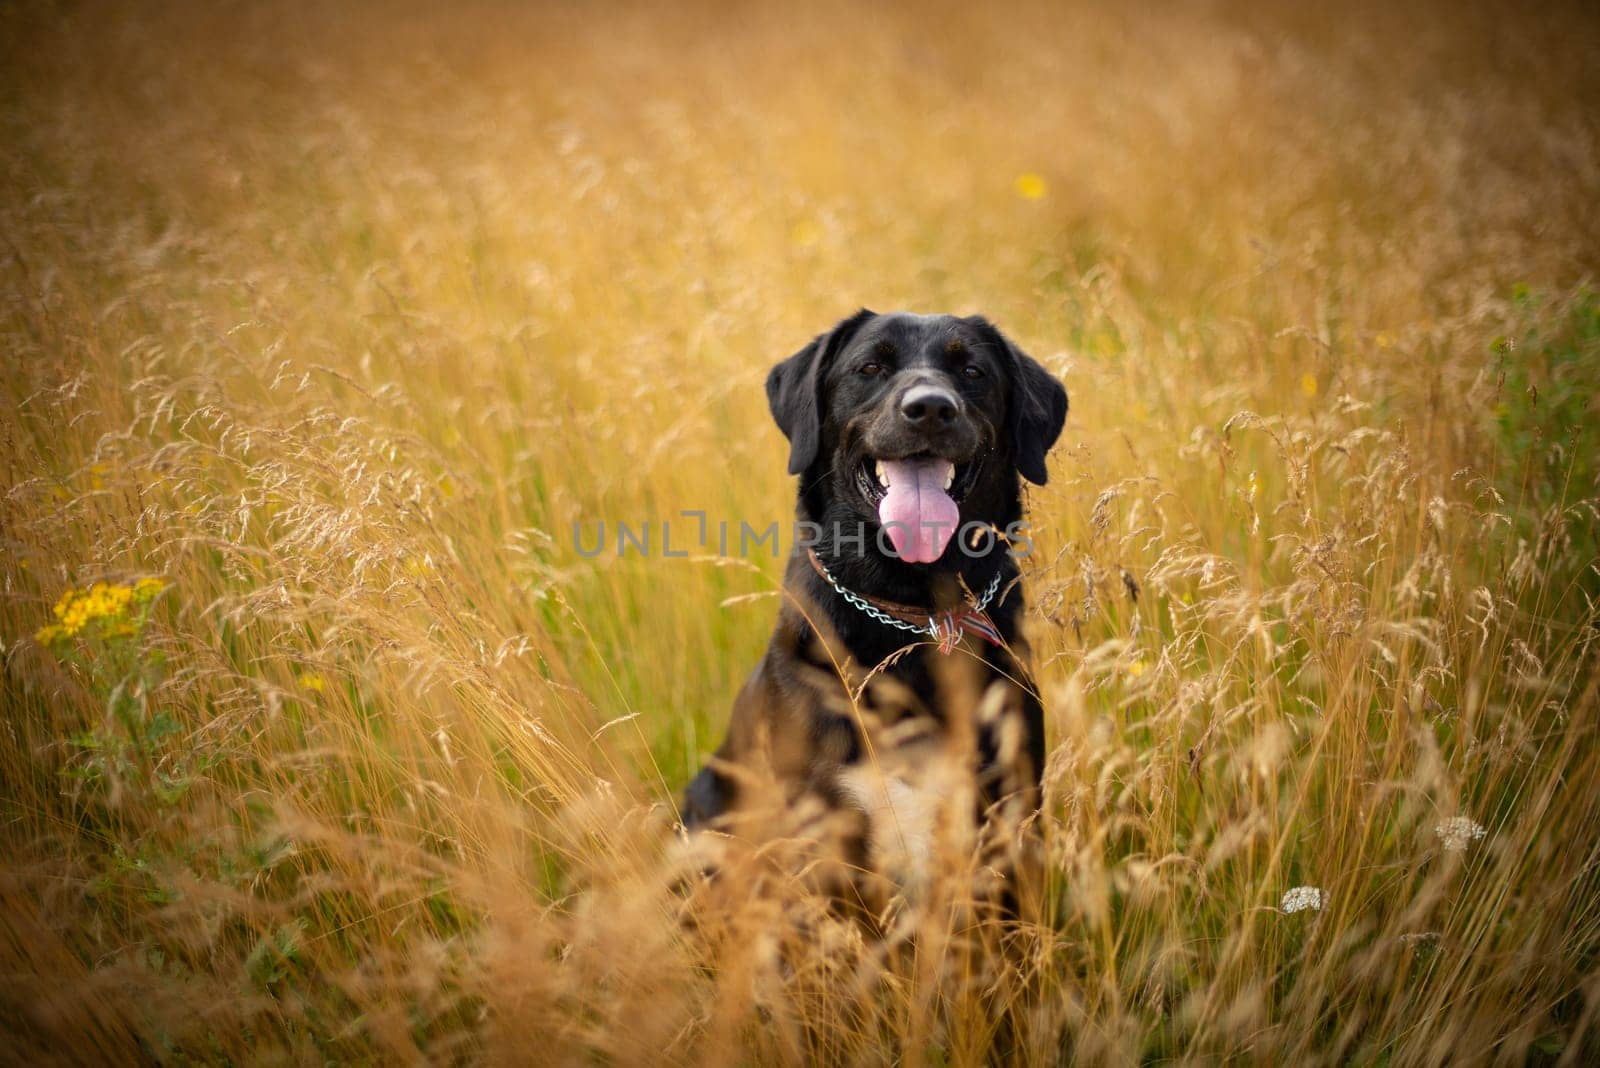 A joyful black Labrador retriever sitting amidst tall, golden grass in a field, with its tongue out, enjoying a sunny day outdoors.